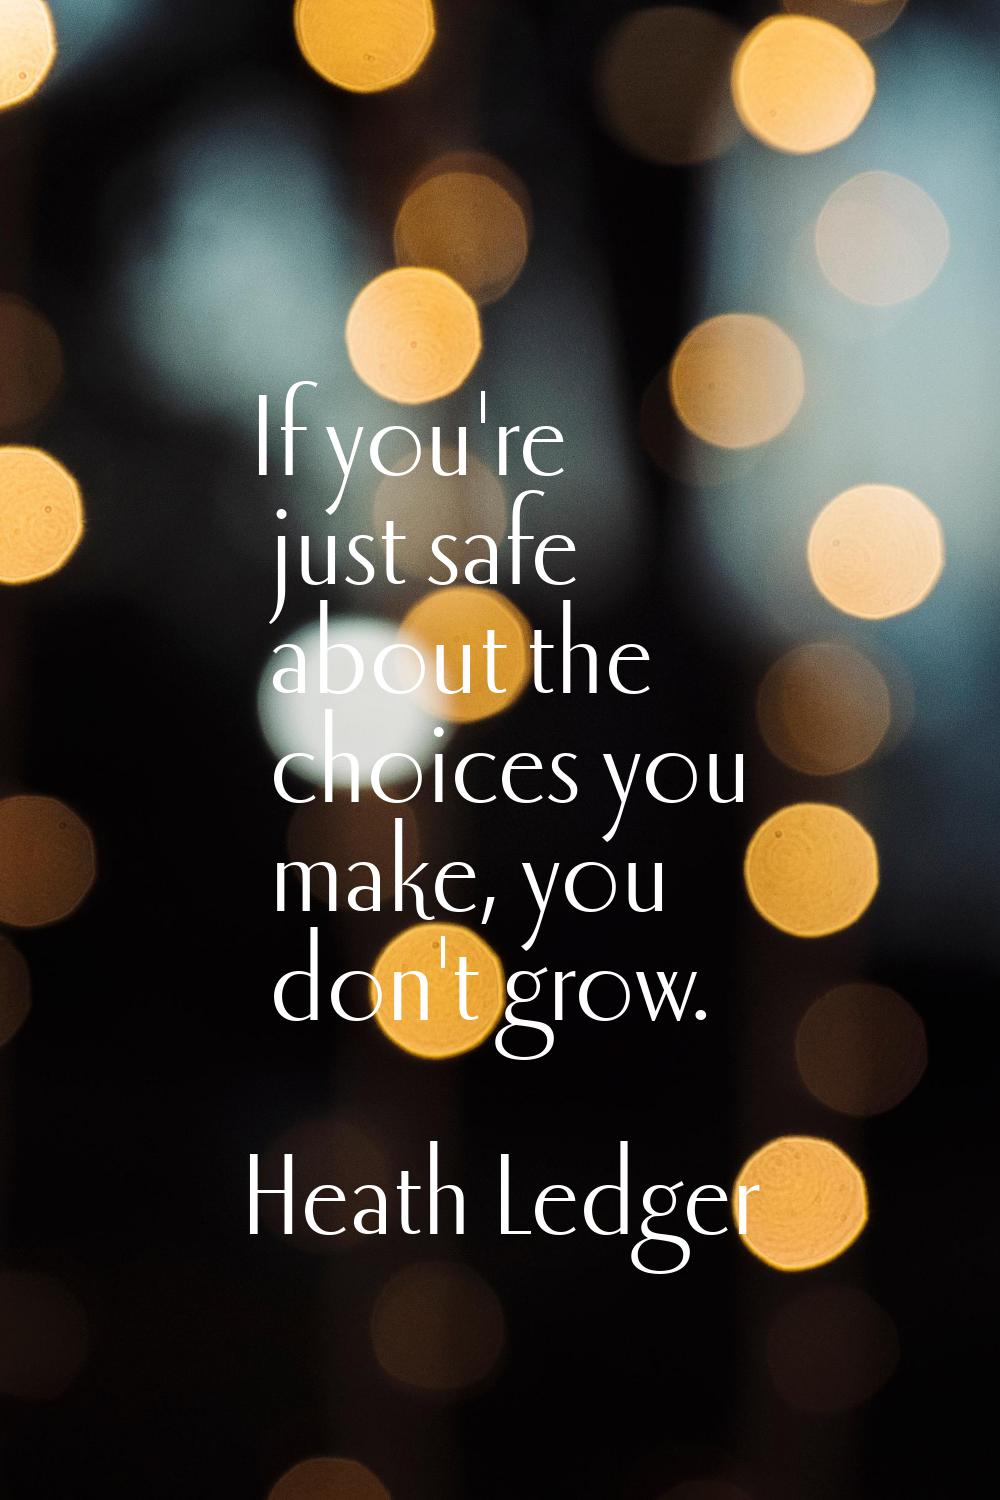 If you're just safe about the choices you make, you don't grow.